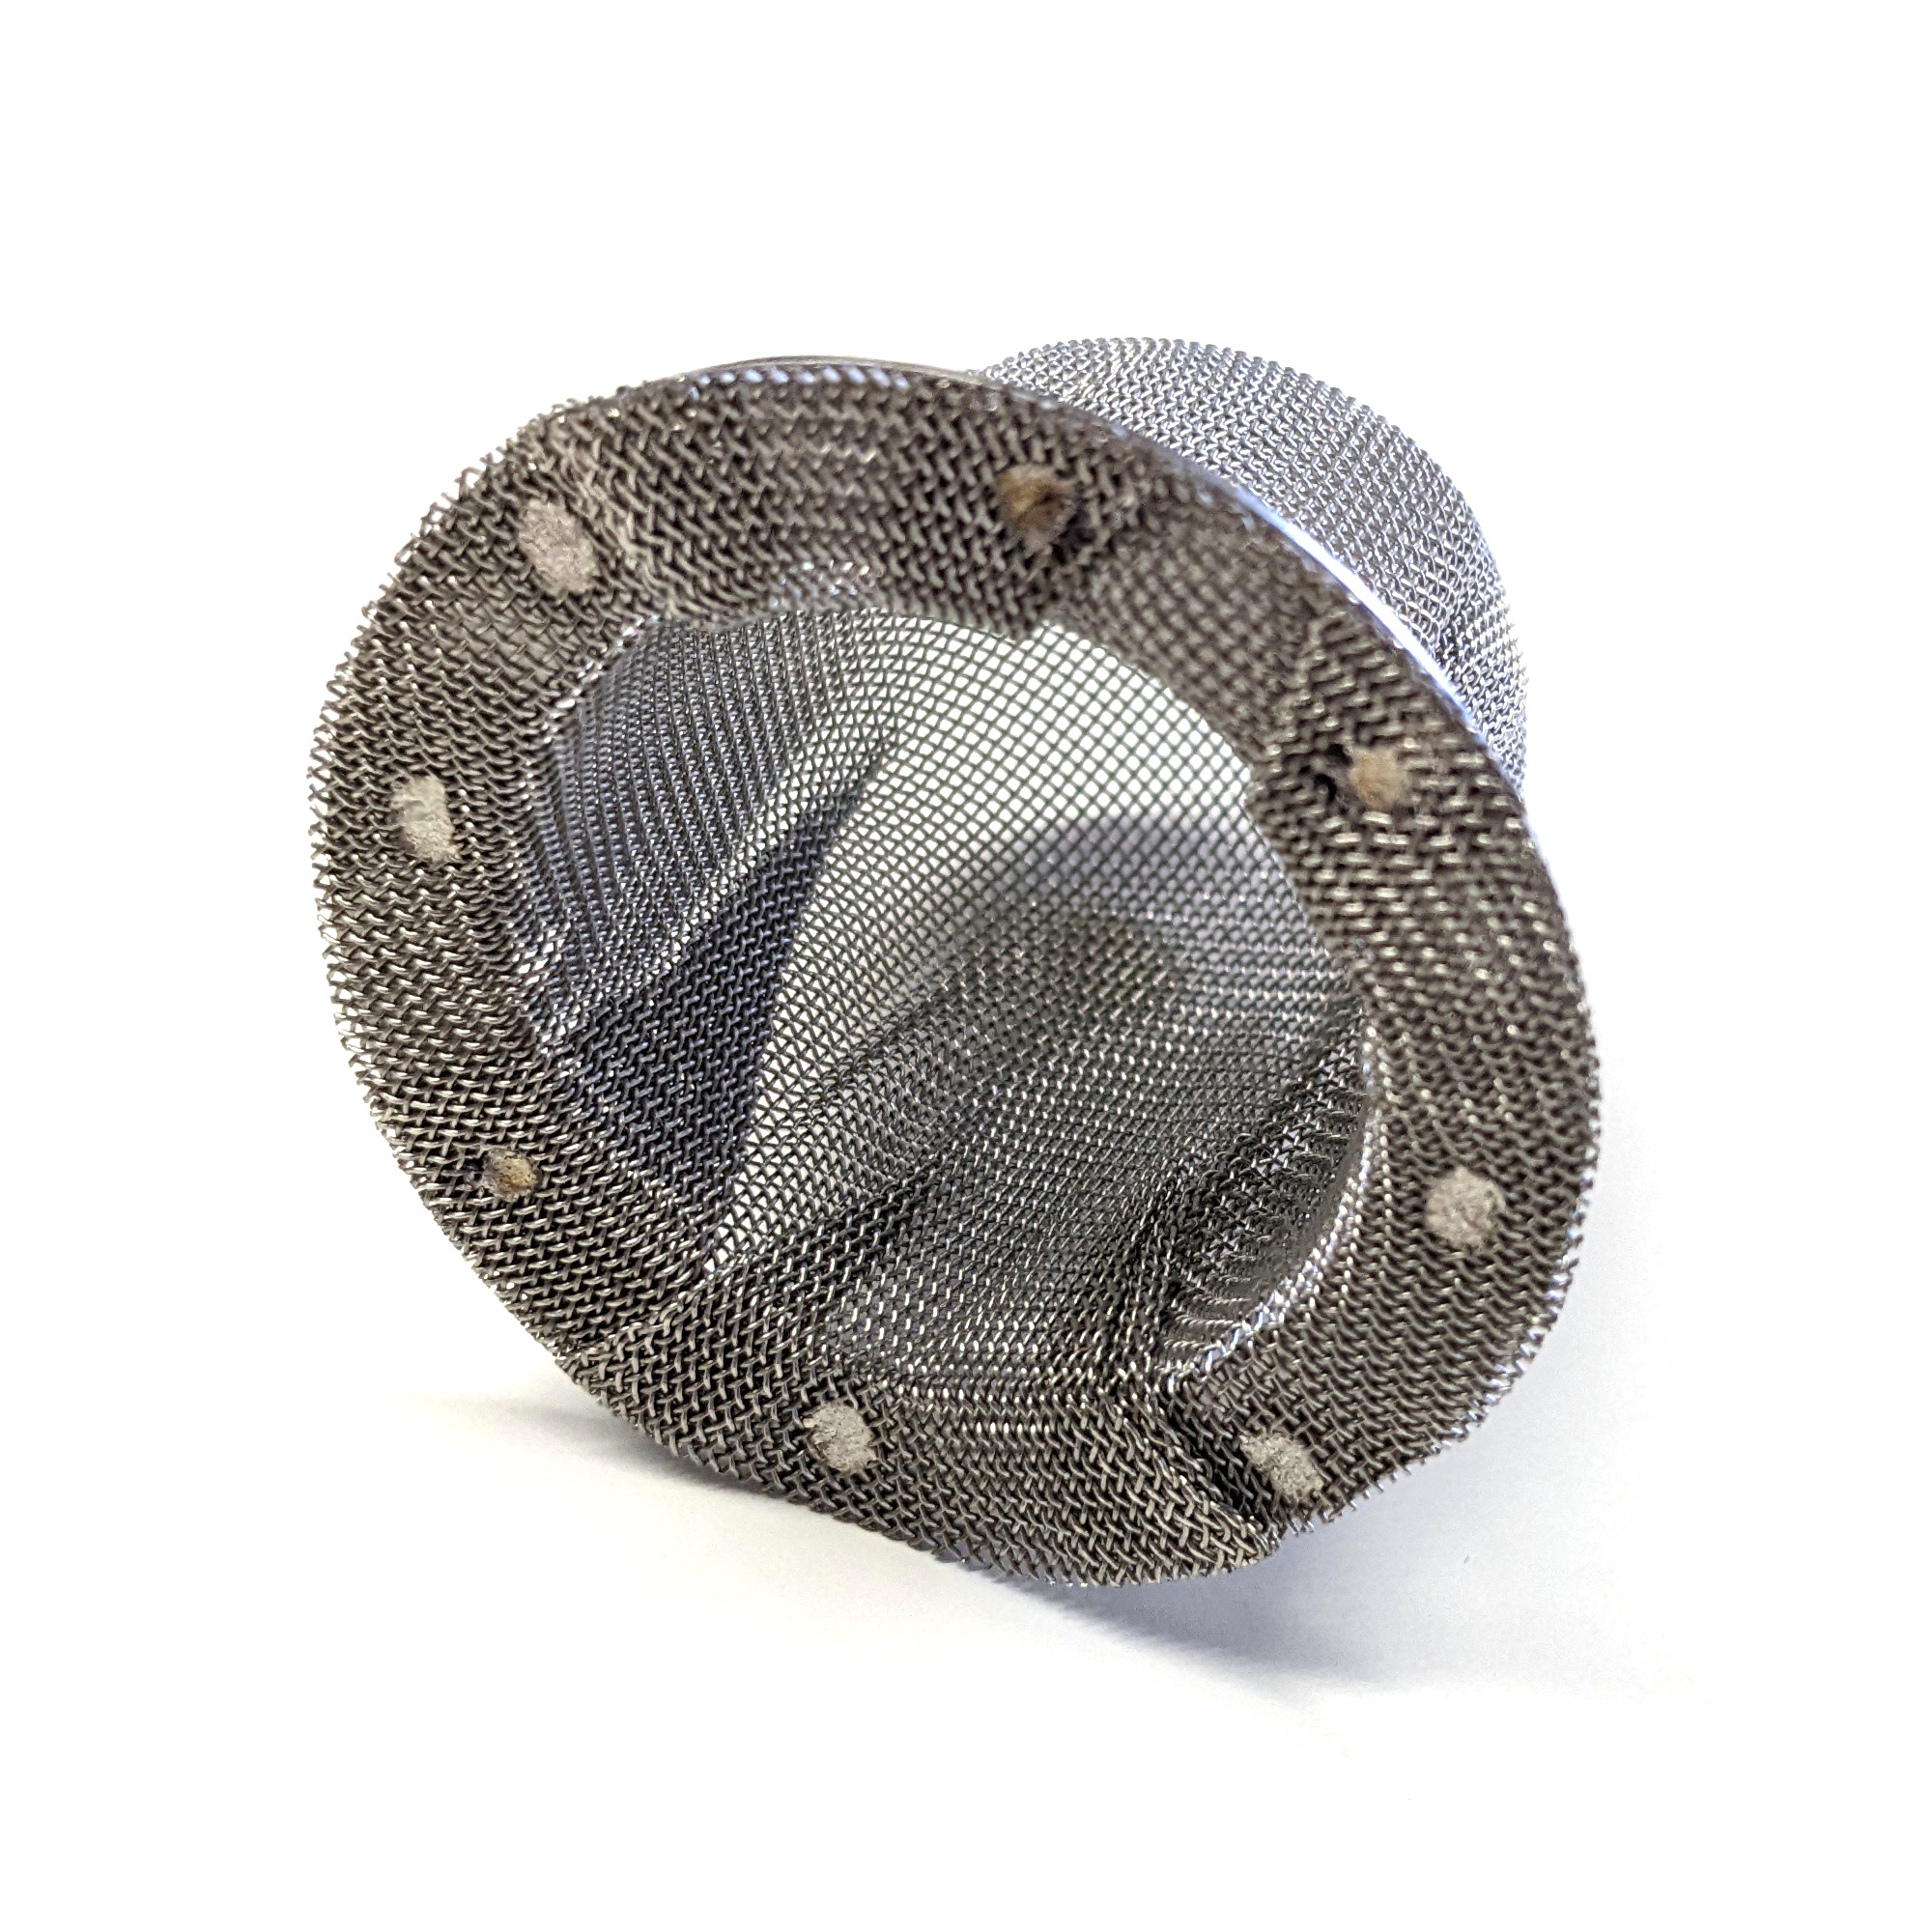 56mm Replacement Spark Arrestor Screen Insert - Click Image to Close